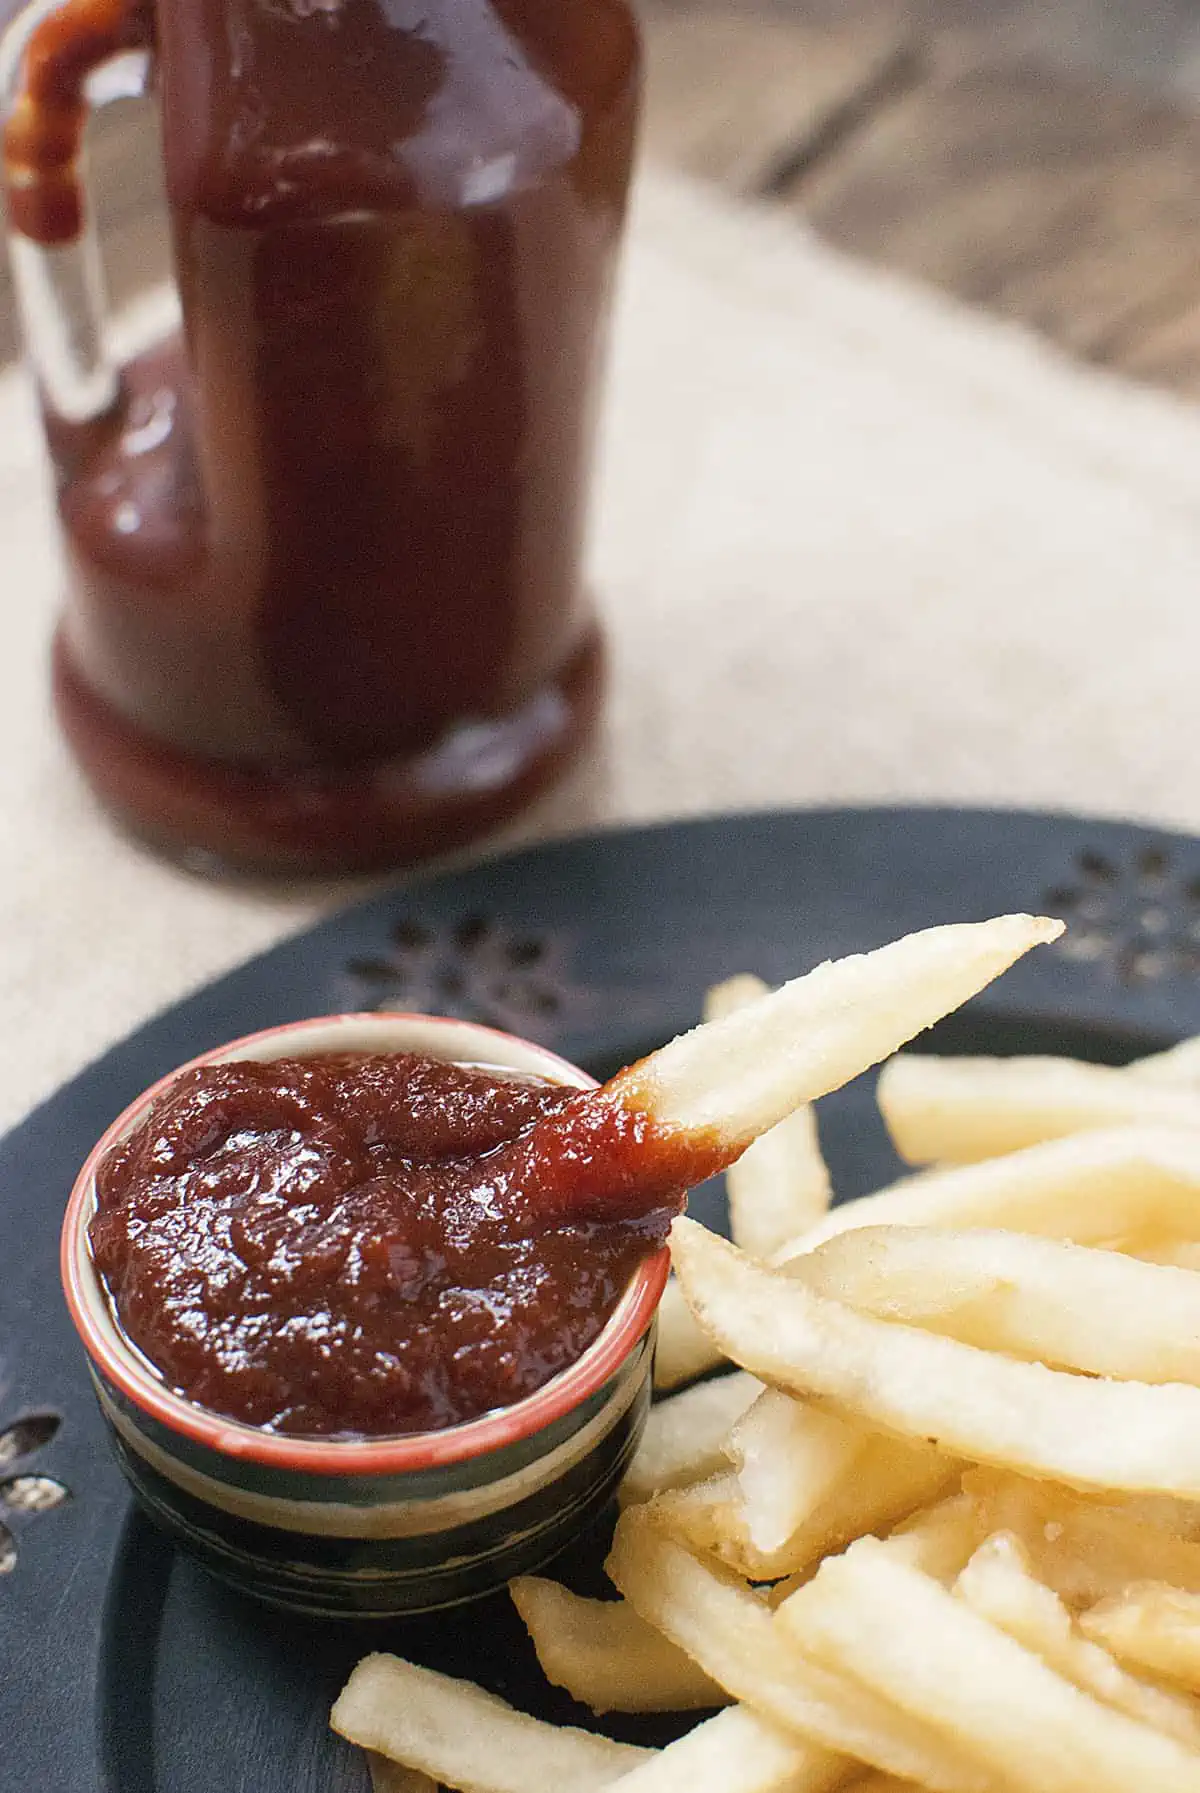 A french fry sticking out of a small bowl of ketchup.